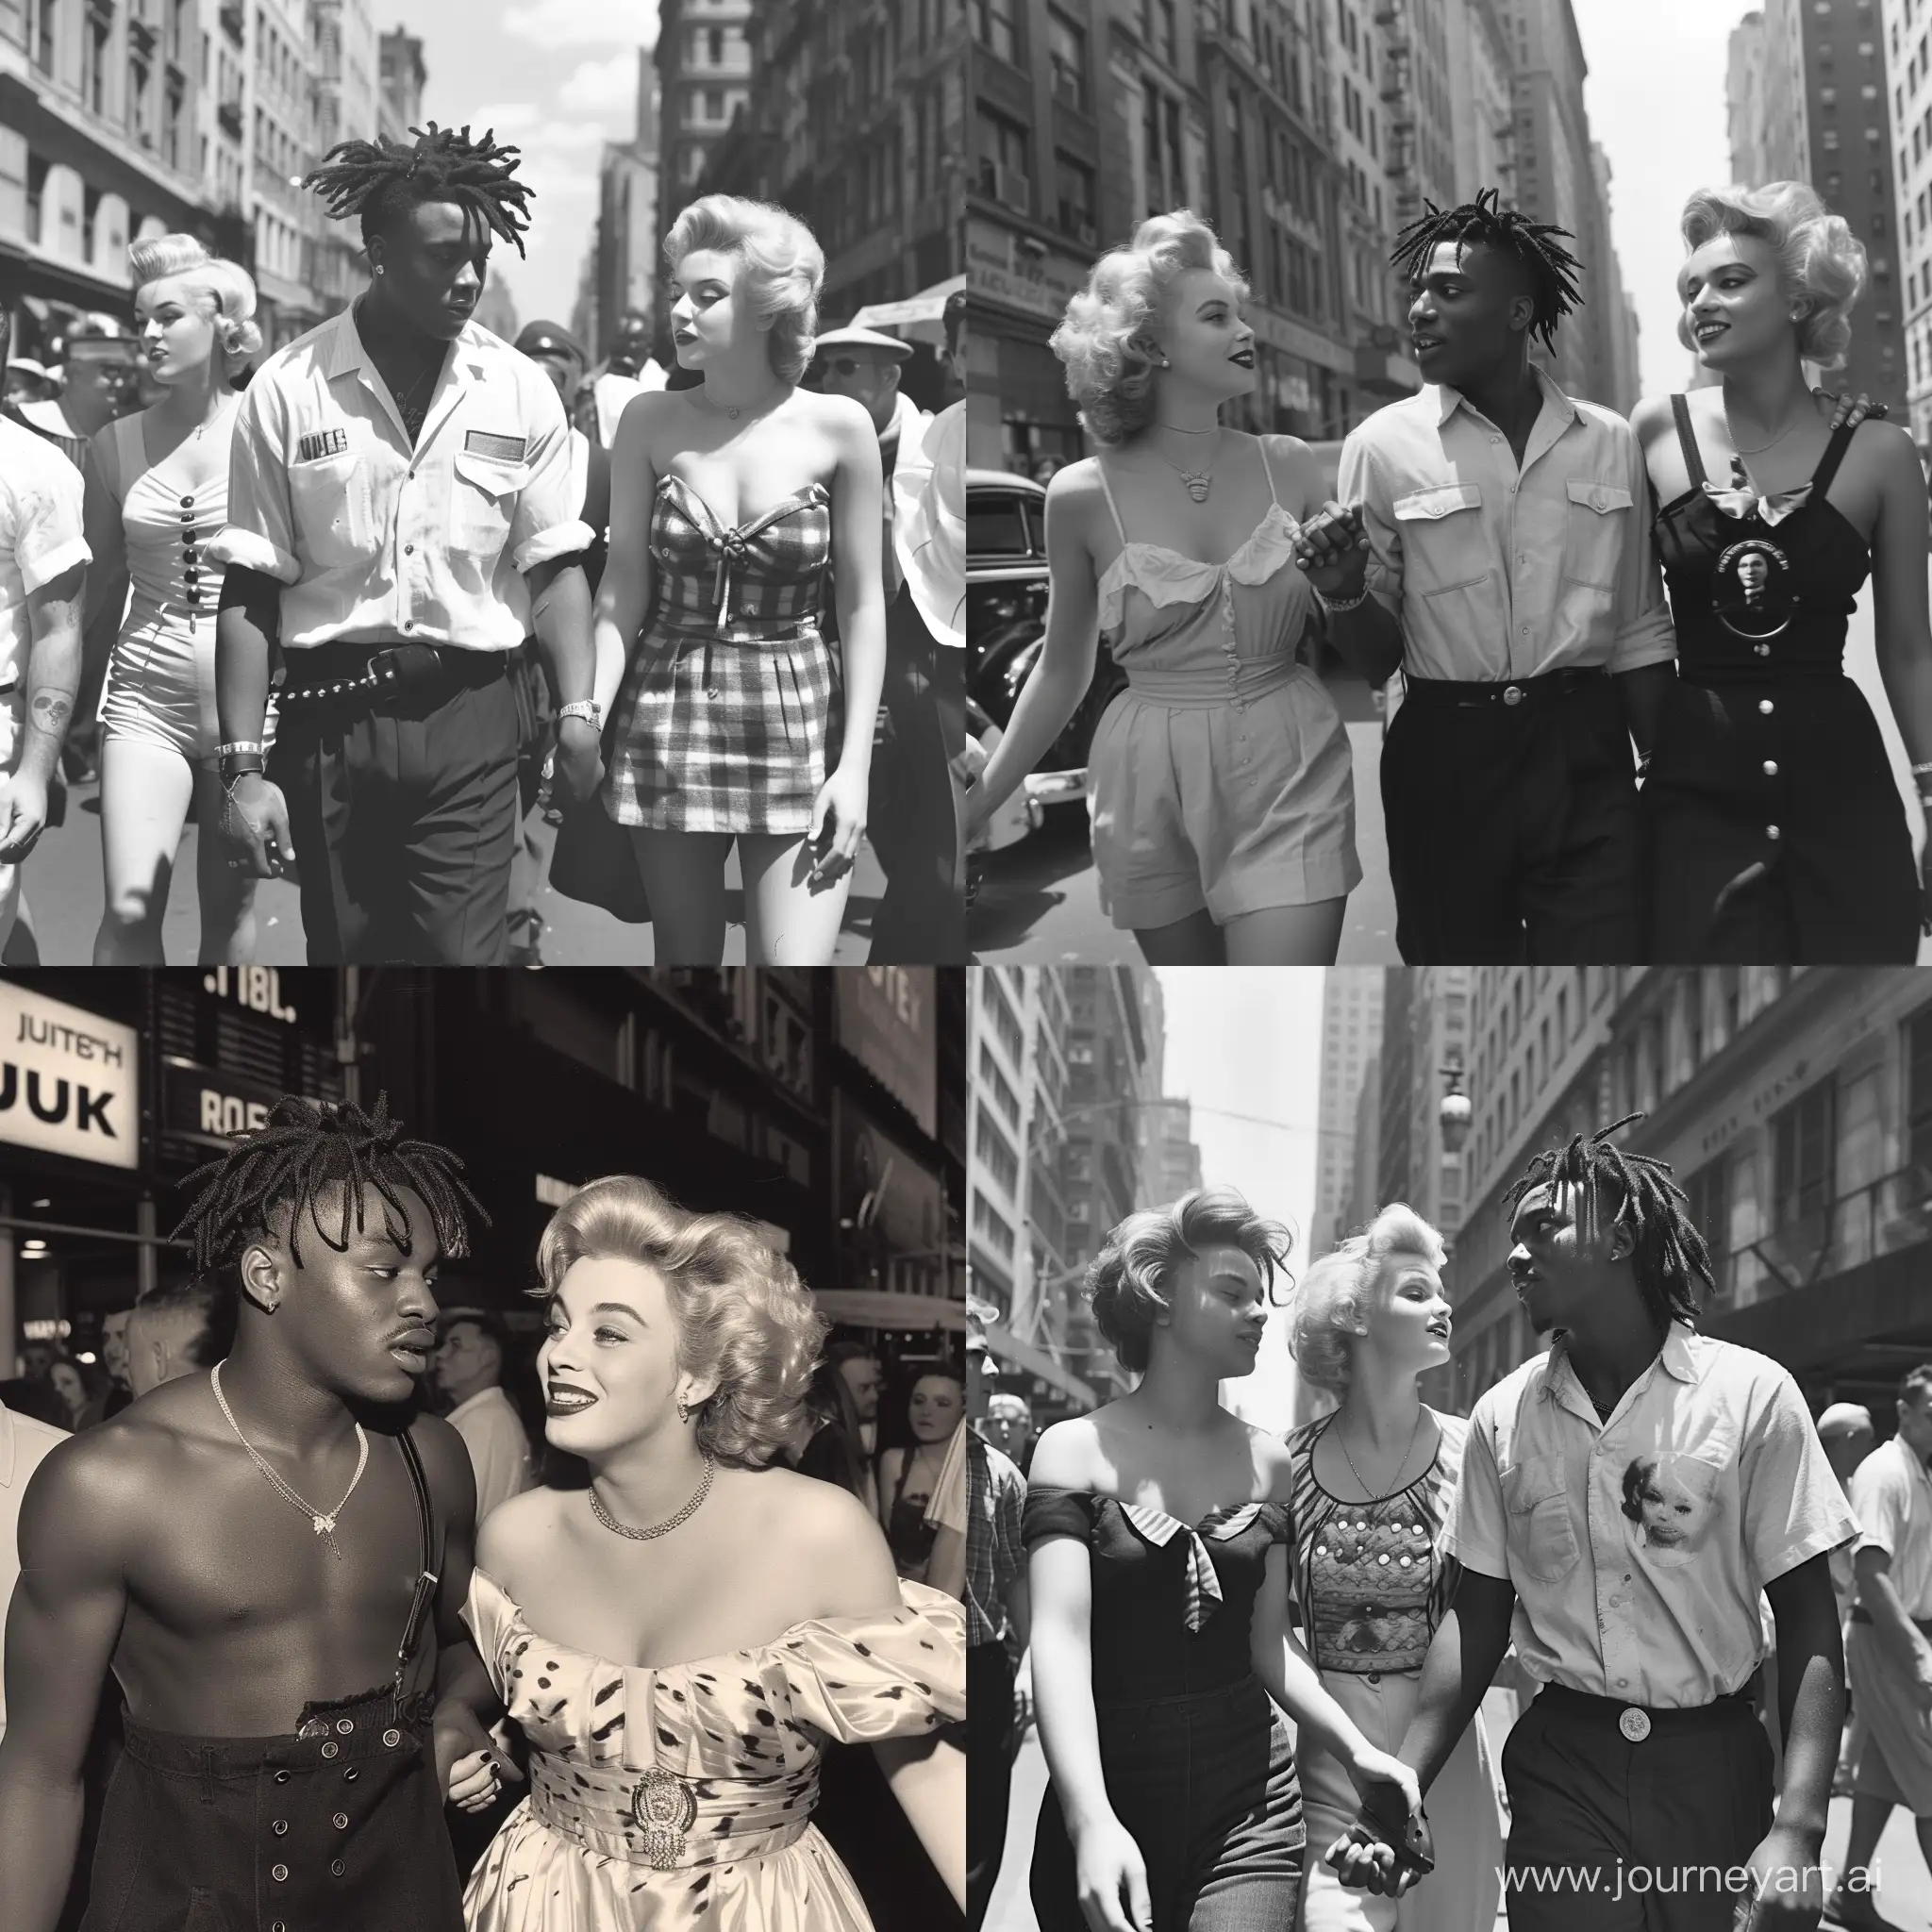 Juice-WRLD-and-Marilyn-Monroe-Stroll-in-1950s-New-York